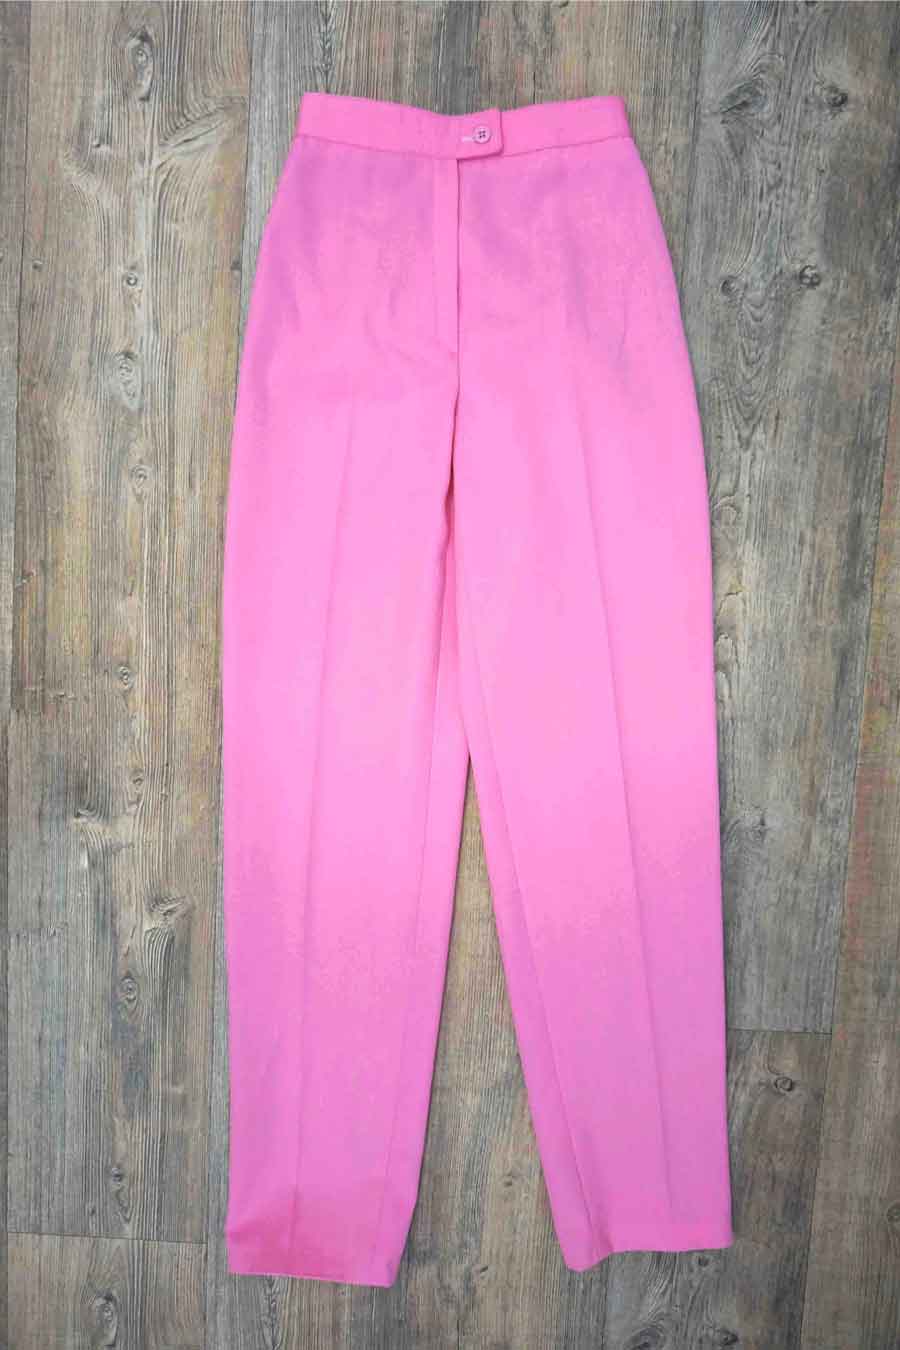 Vintage 1960s Bright Pink Wool Straight Leg Trousers